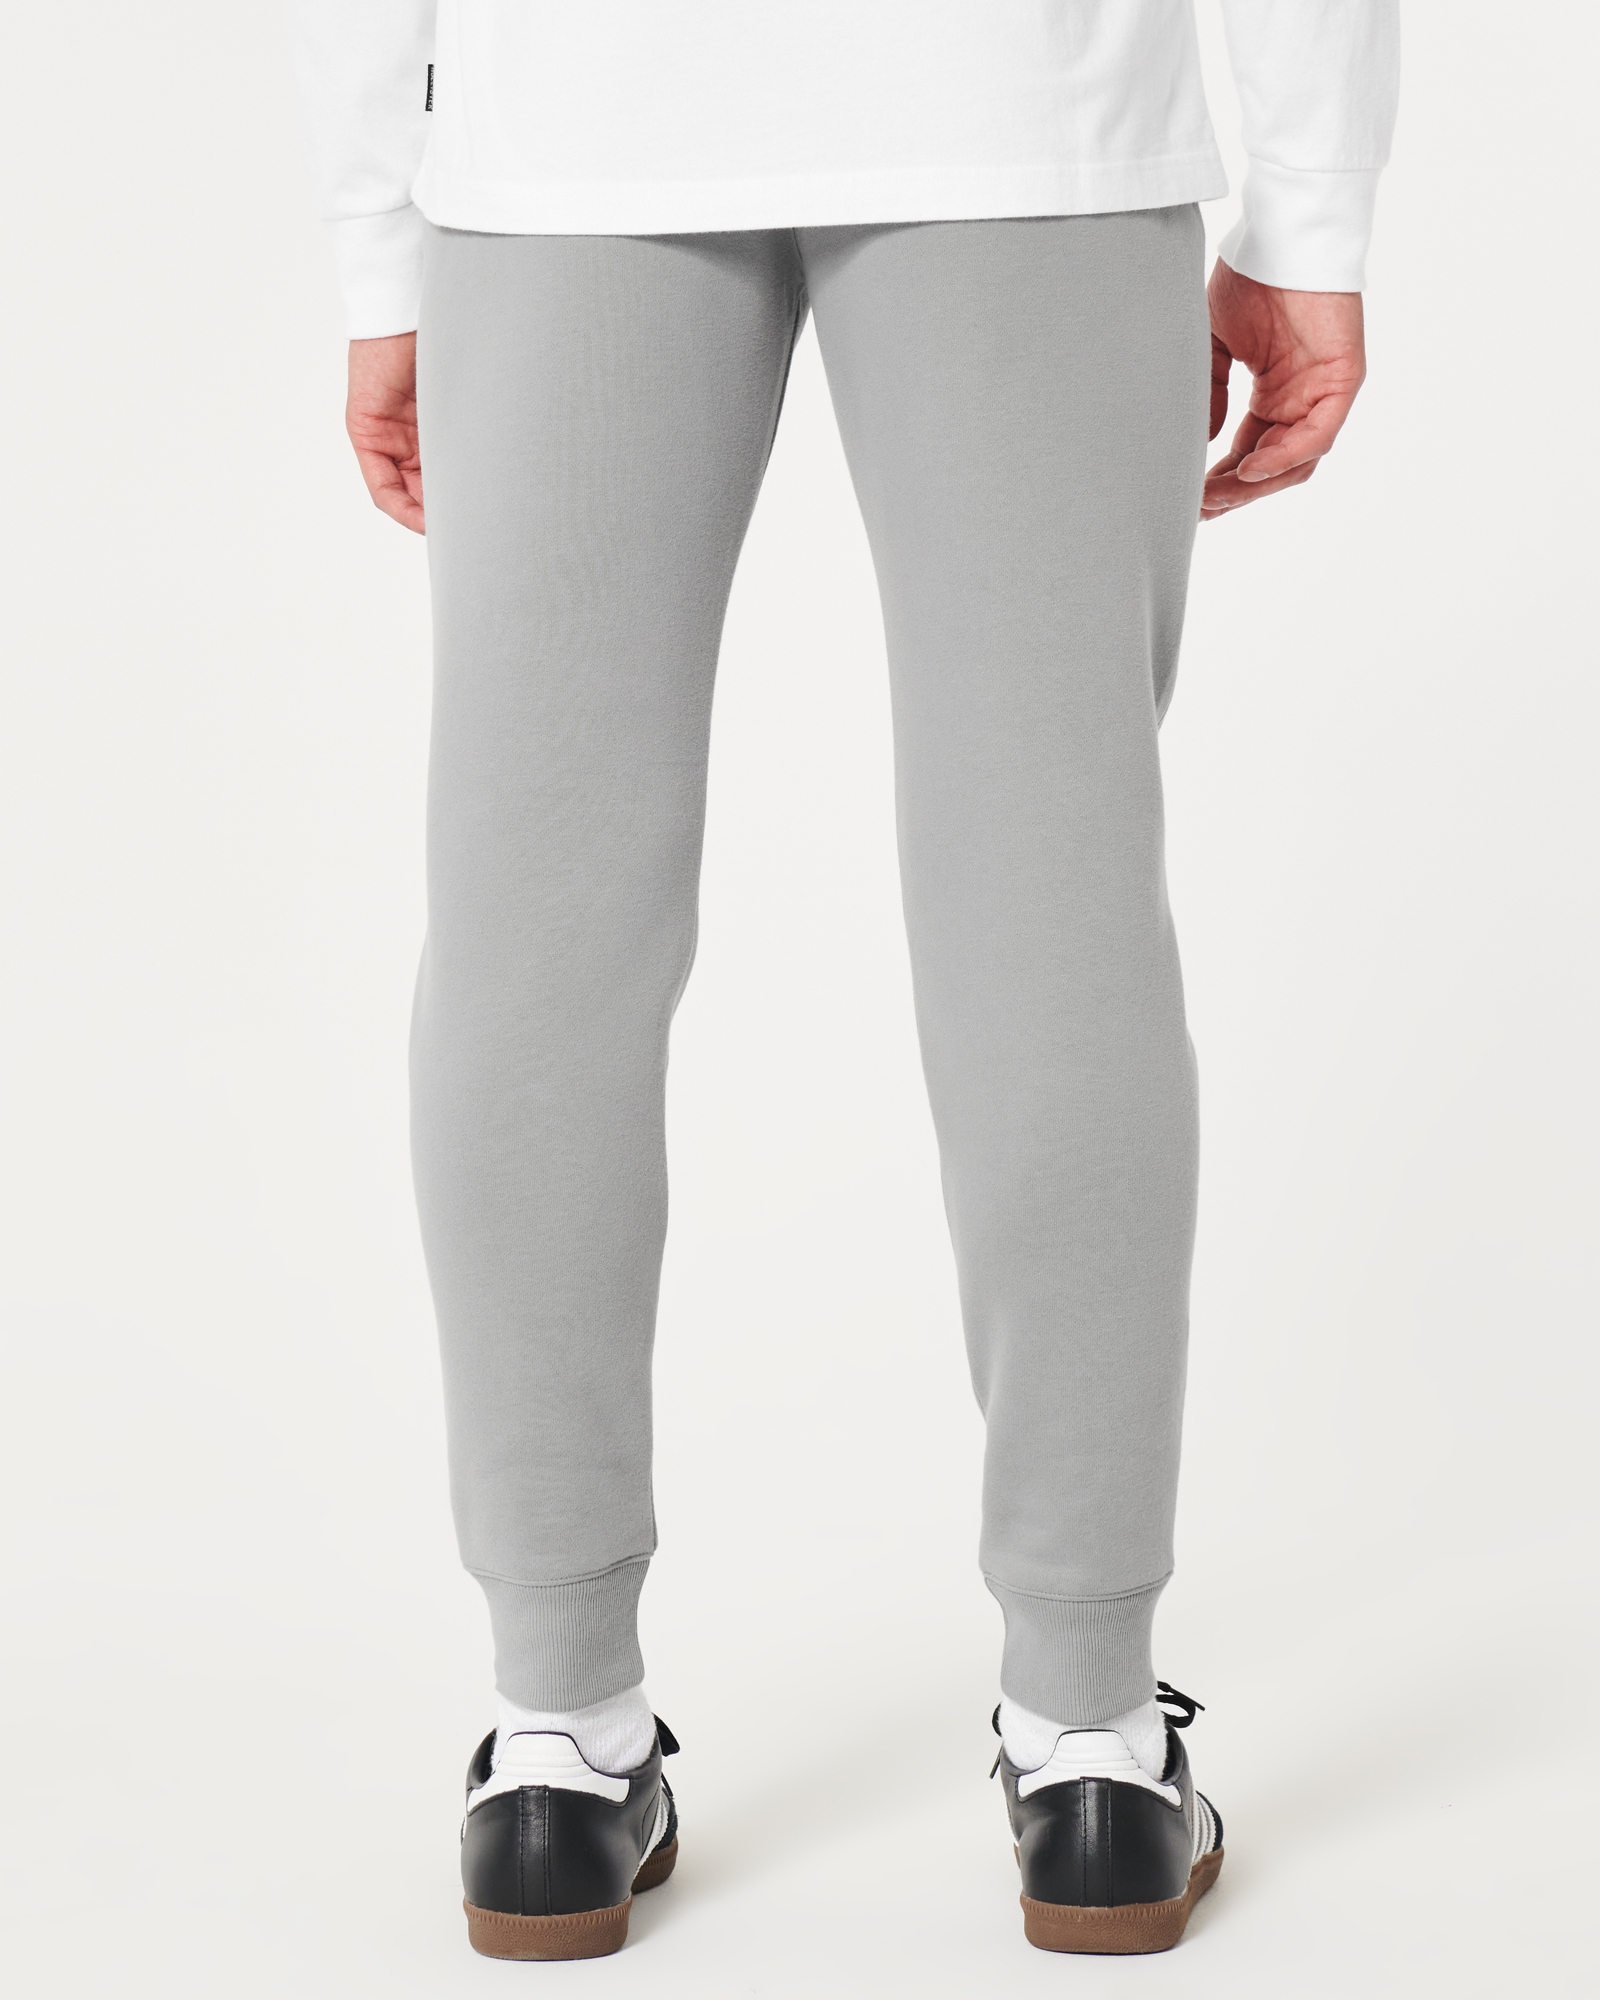 Hollister Sweatpants Gray Size M - $13 (56% Off Retail) - From Liv